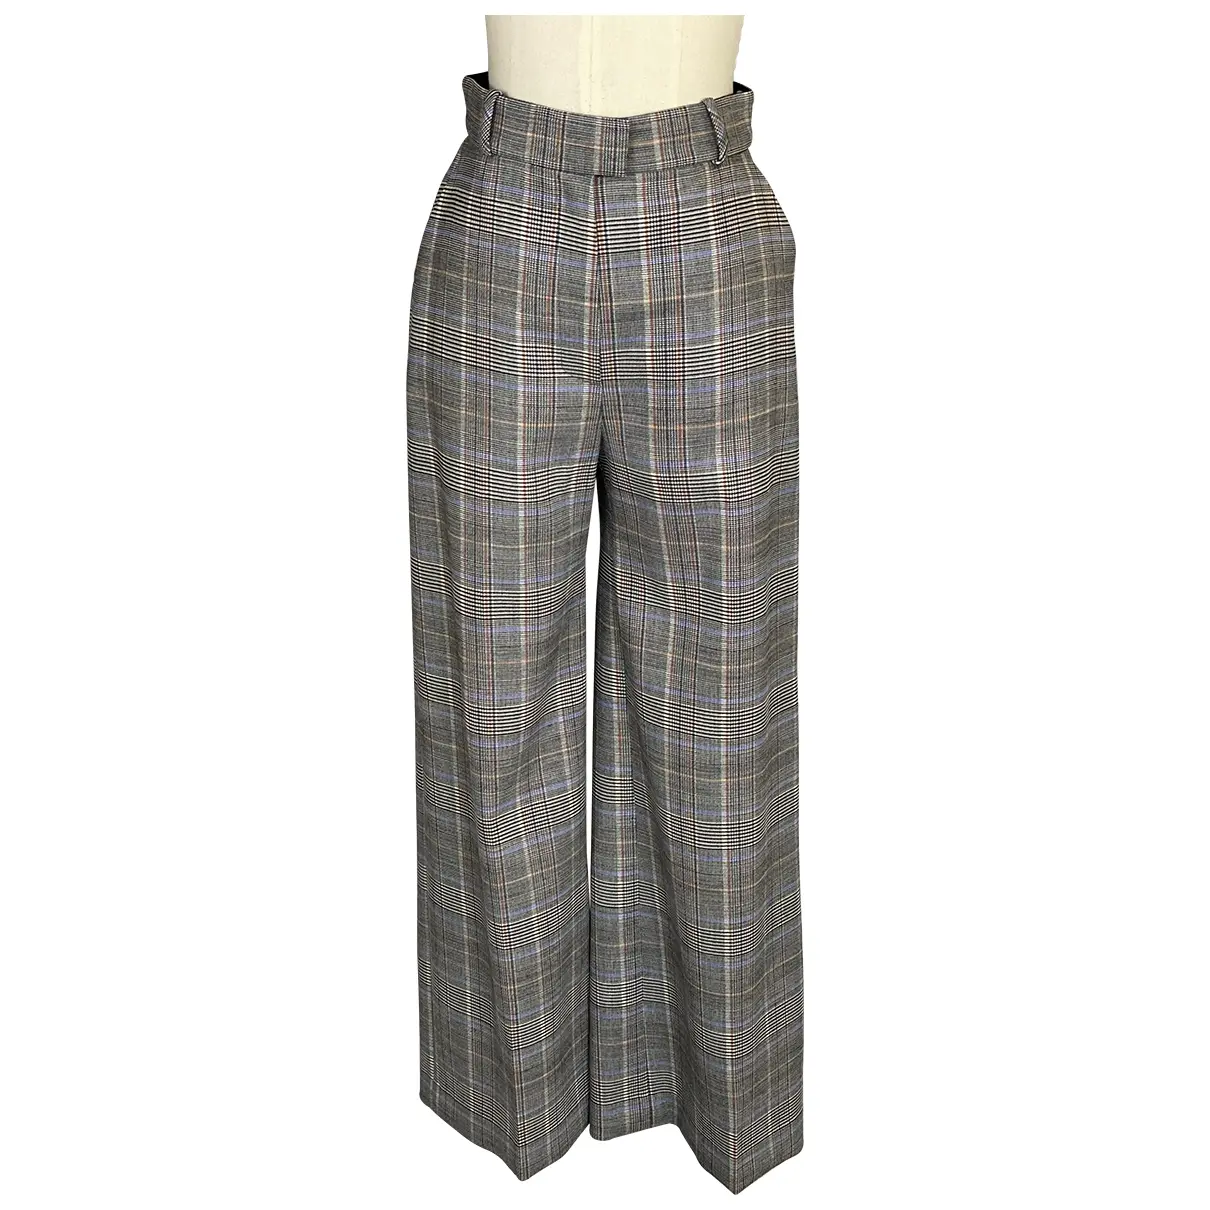 Wool trousers Martin Grant - Vintage